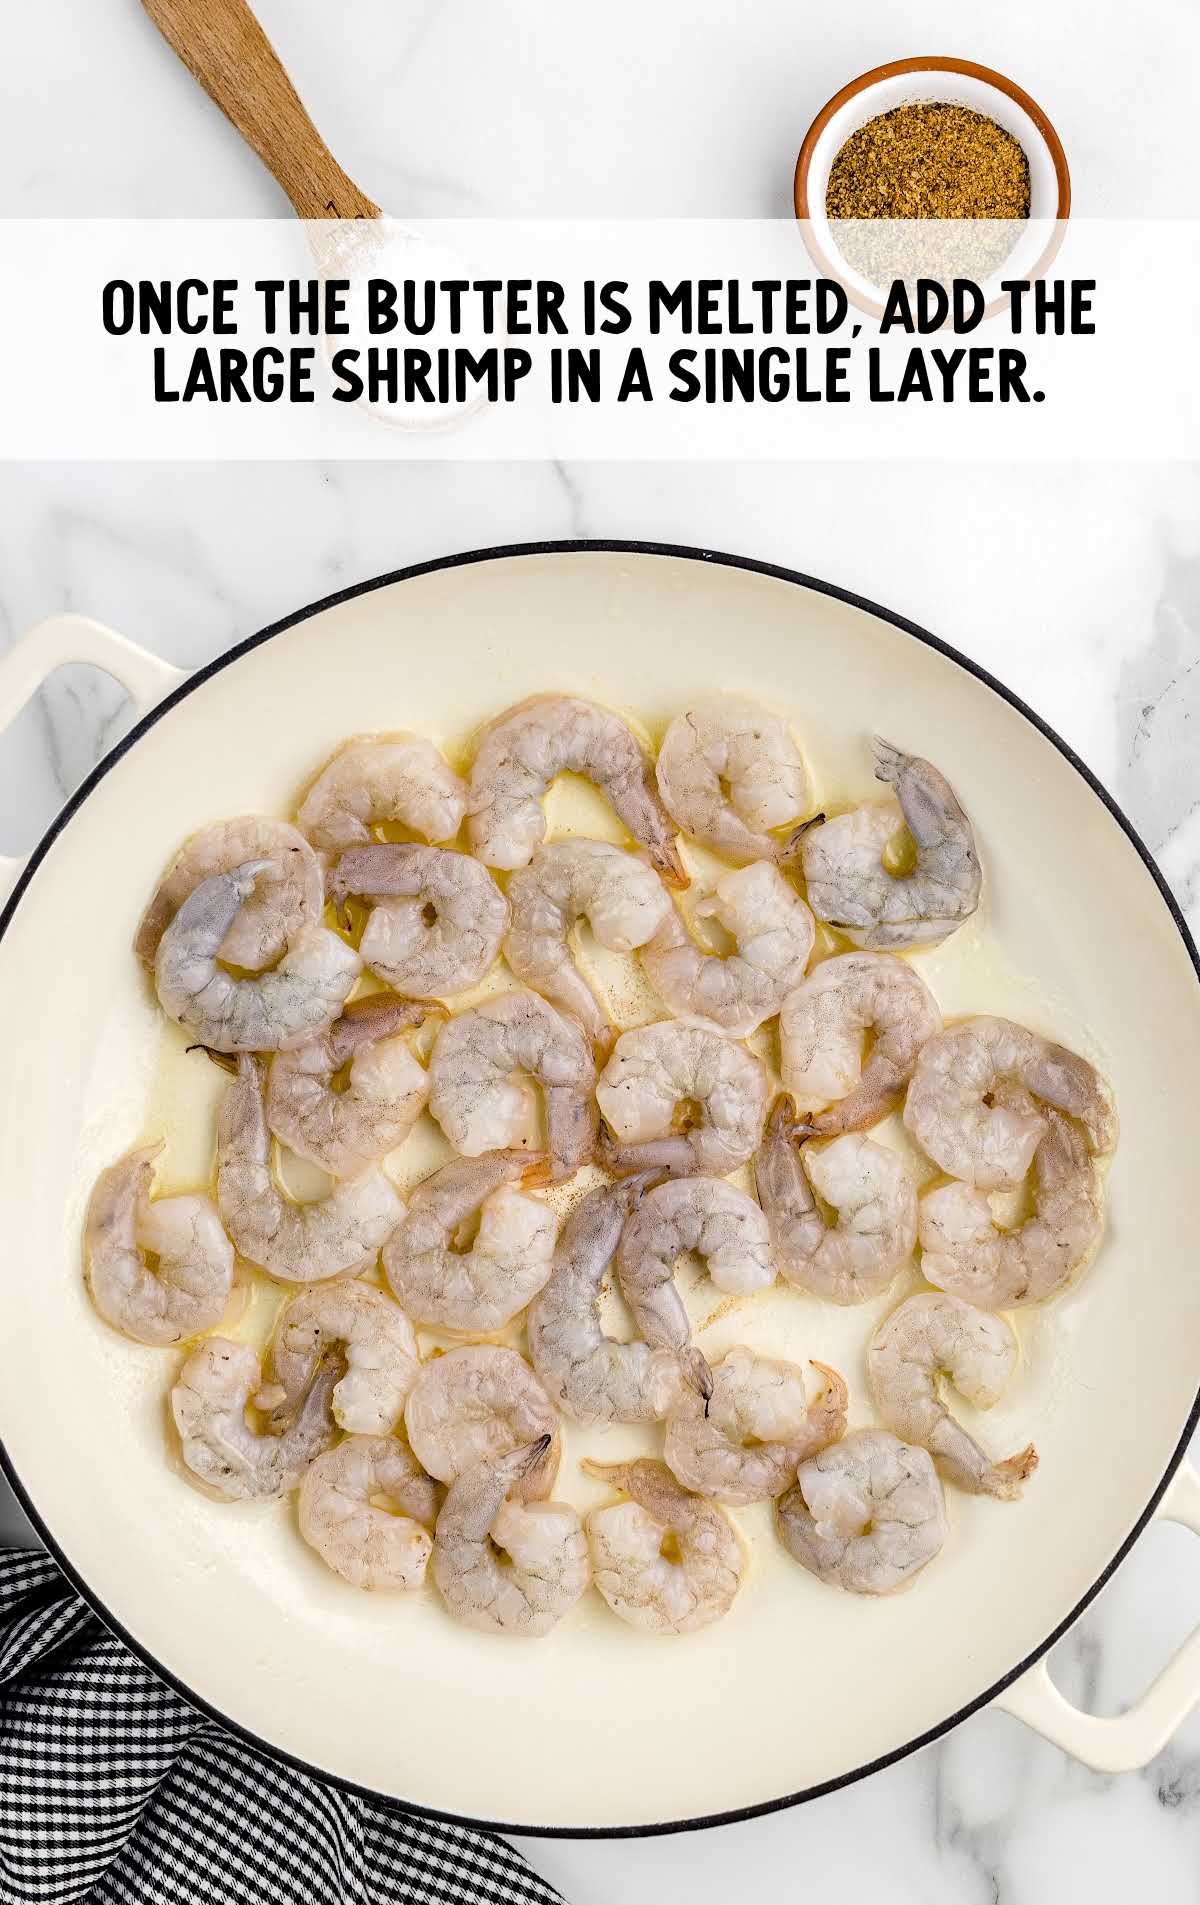 shrimps added to the melted butter